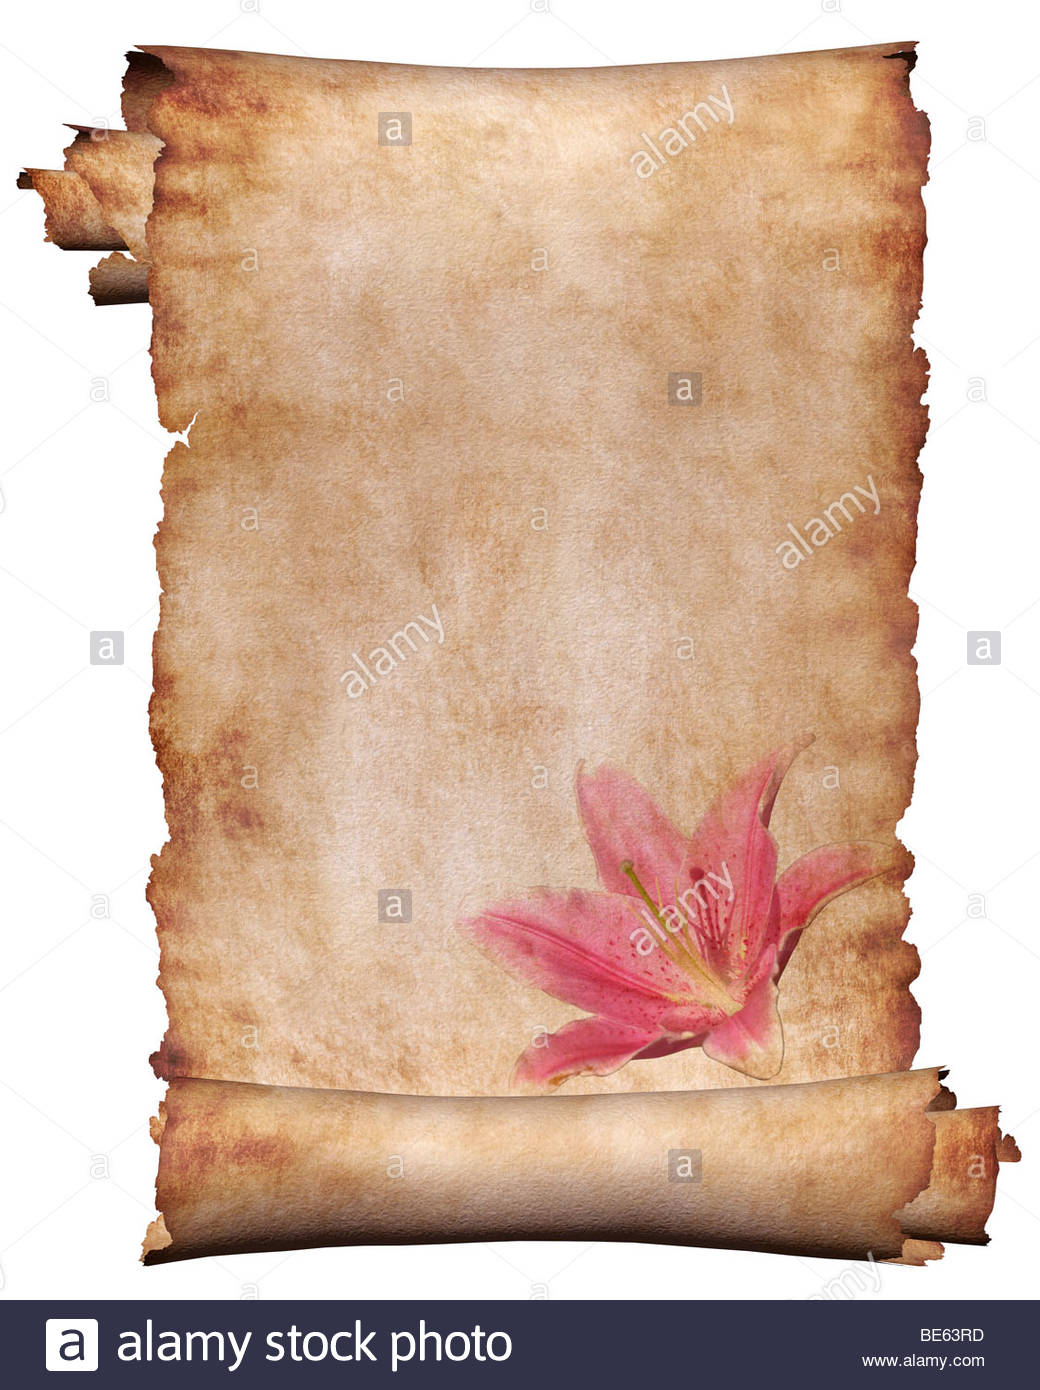 Manuscript Roll Of Parchment With Flower Background Frame Stock